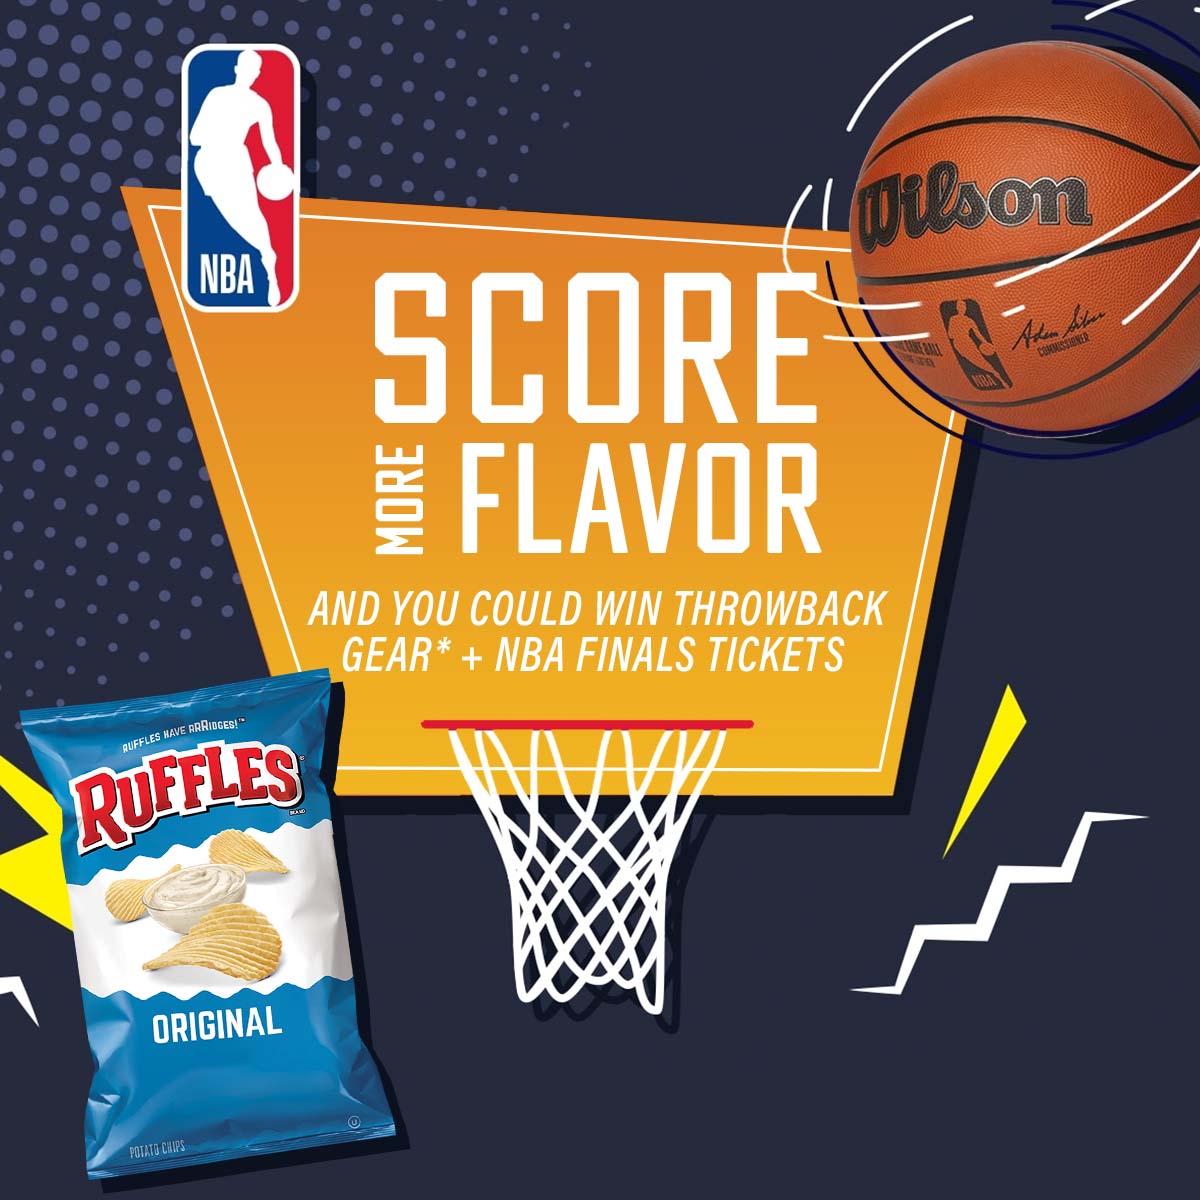 Your chance to score legendary NBA prizes